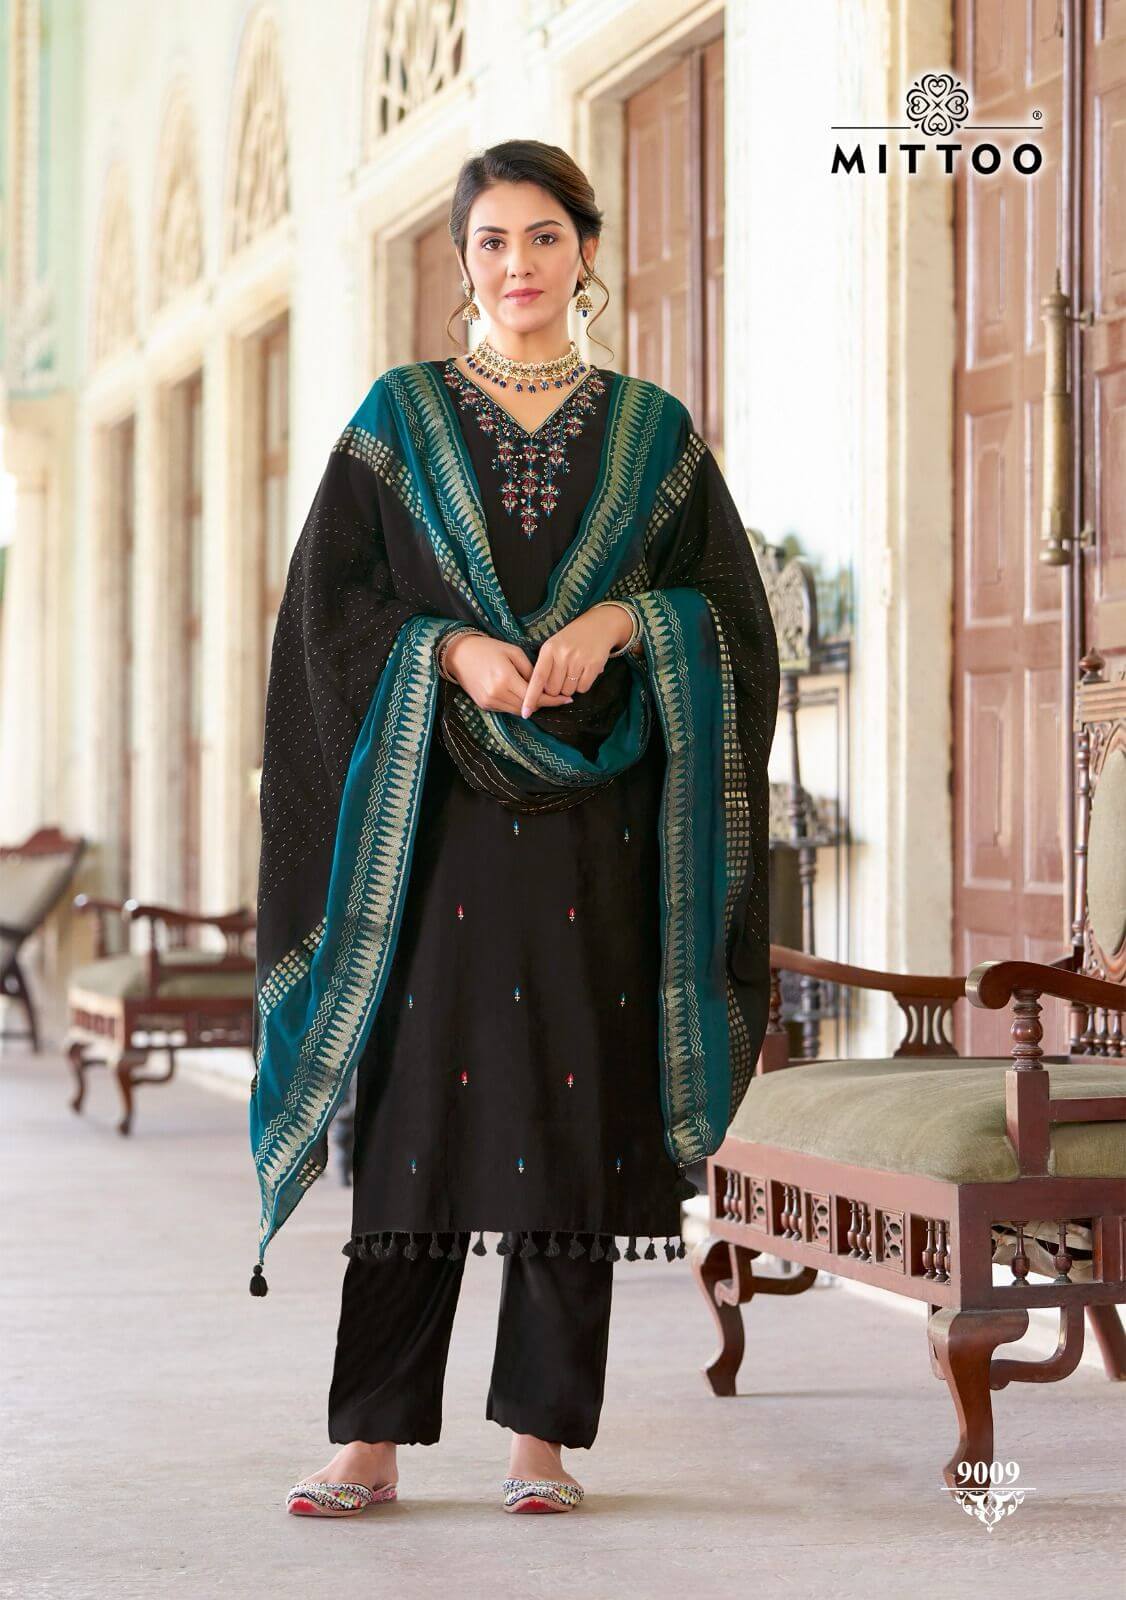 Mittoo Mosam Vol 2 Embroidery Salwar Kameez Catalog collection 8